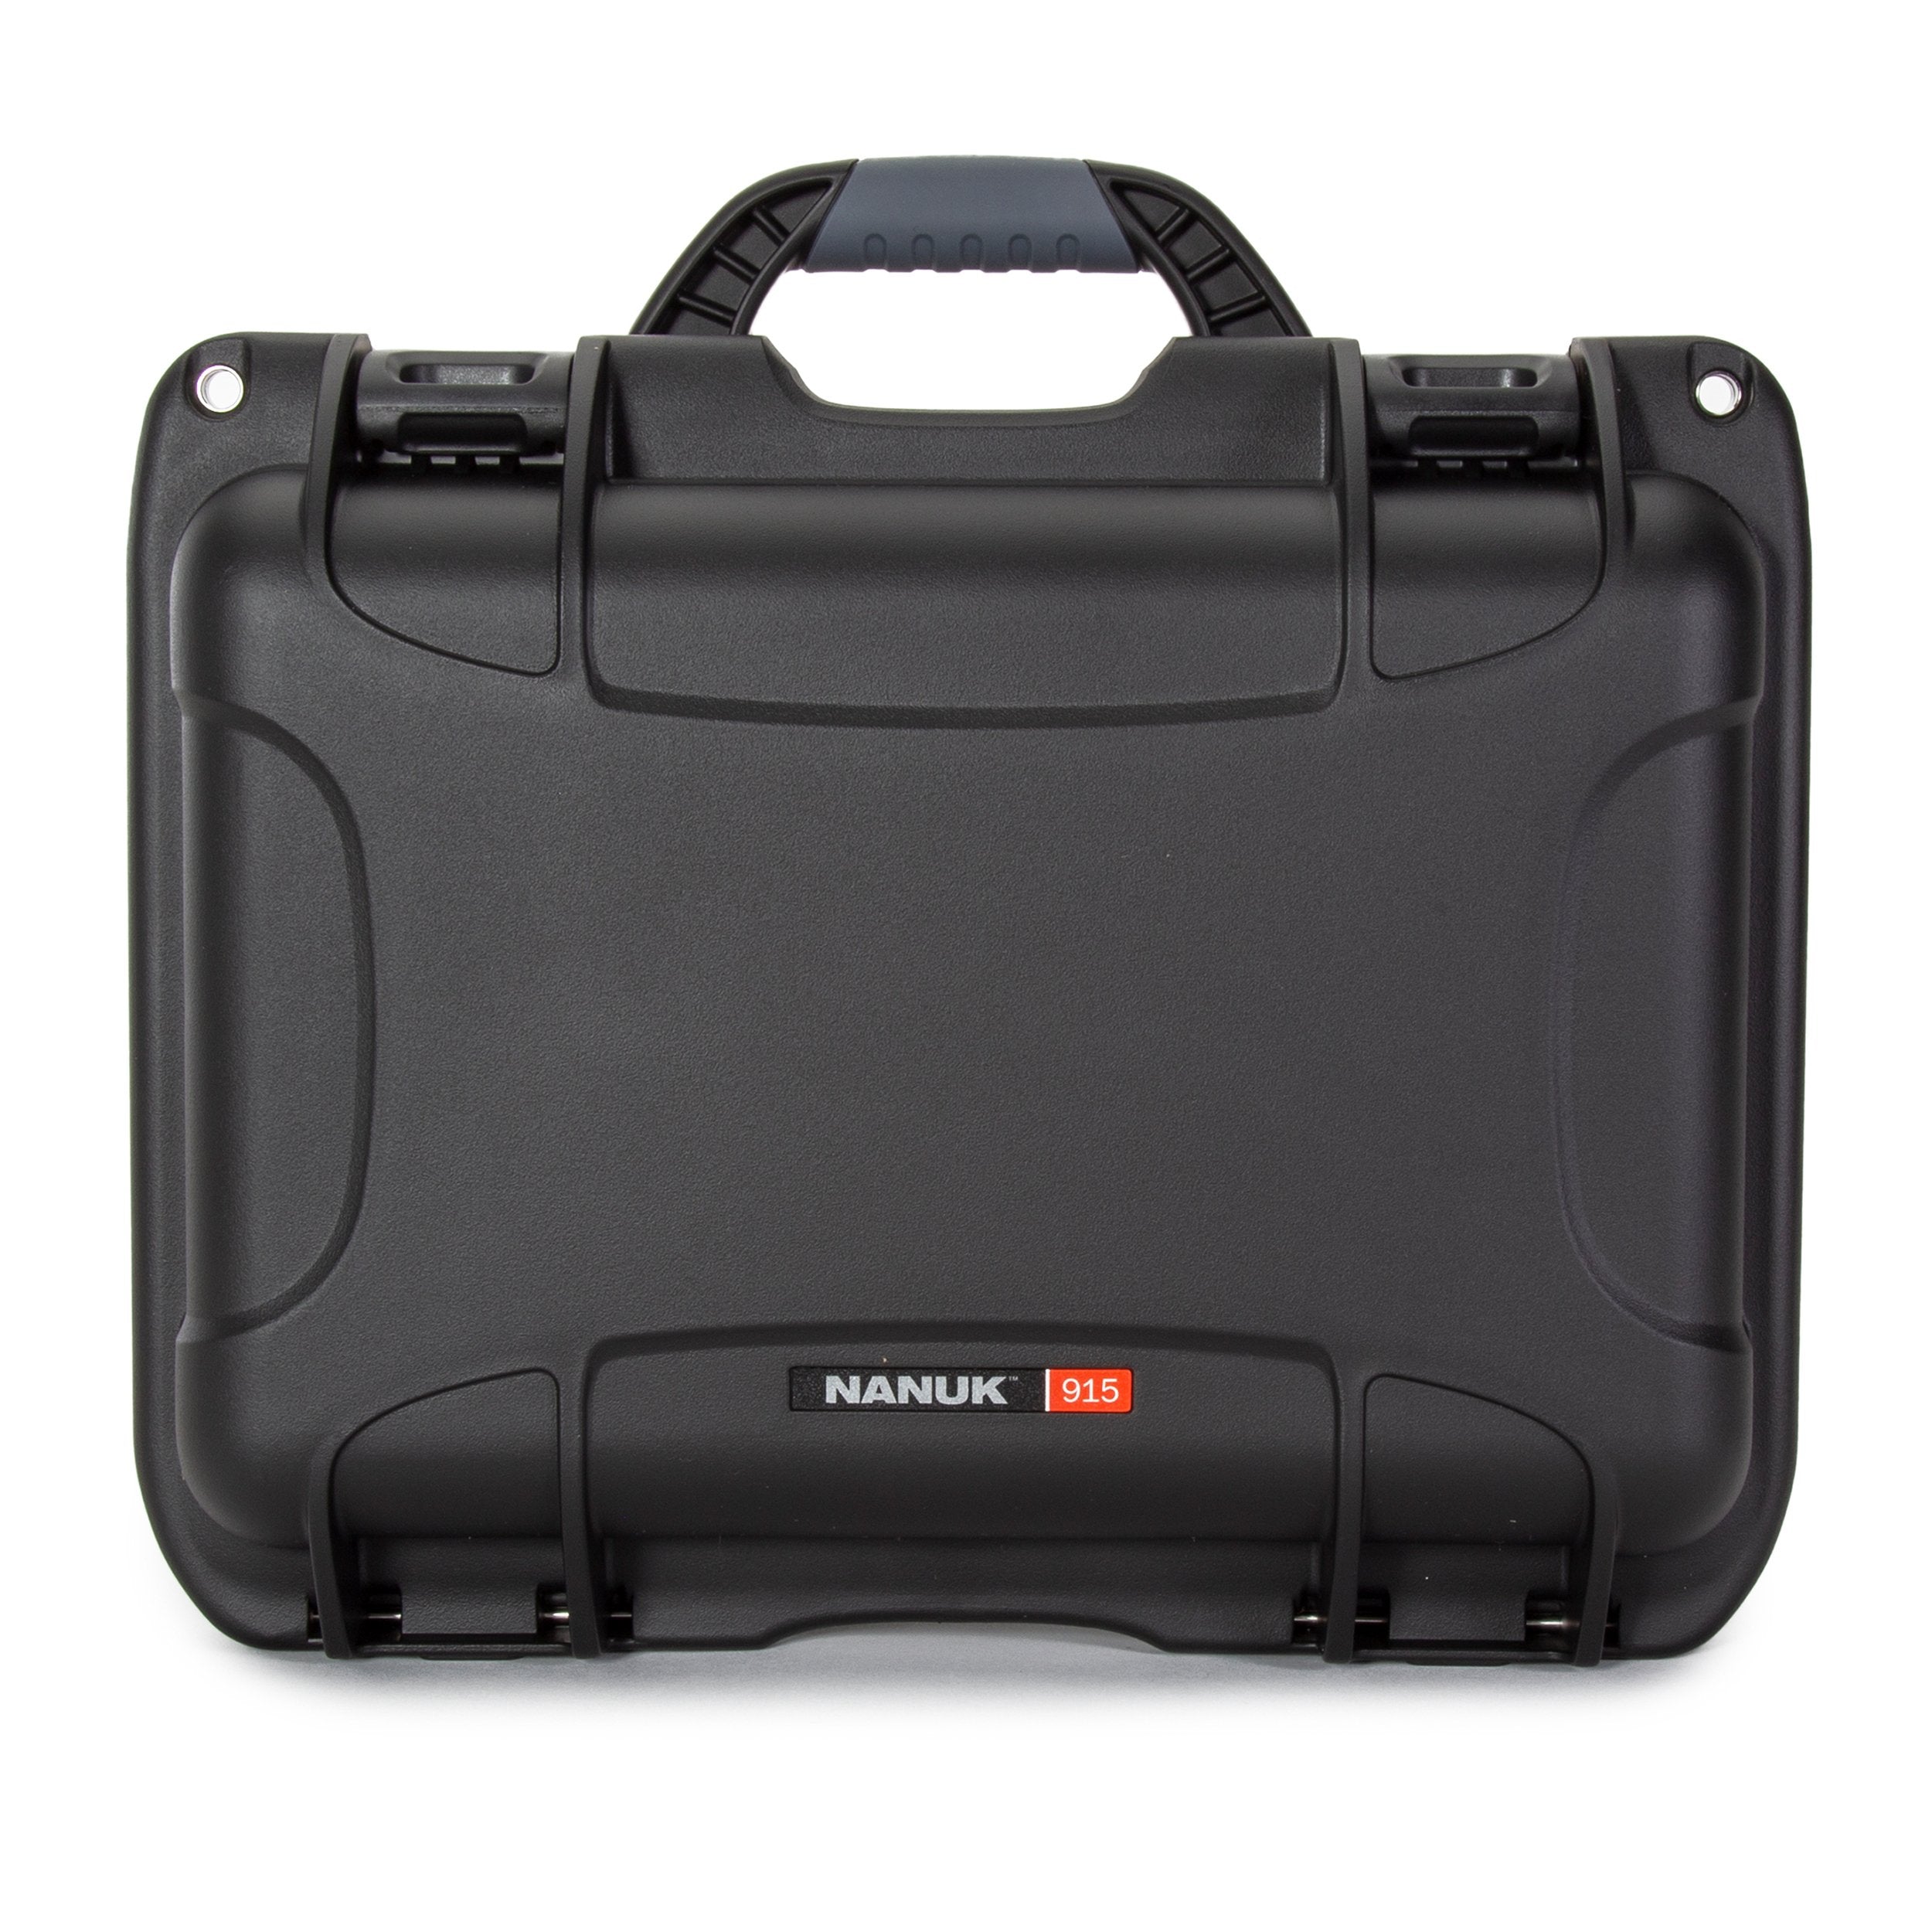 nanuk 910 professional hand gun pistol case military approved waterproof and shockproof graphite